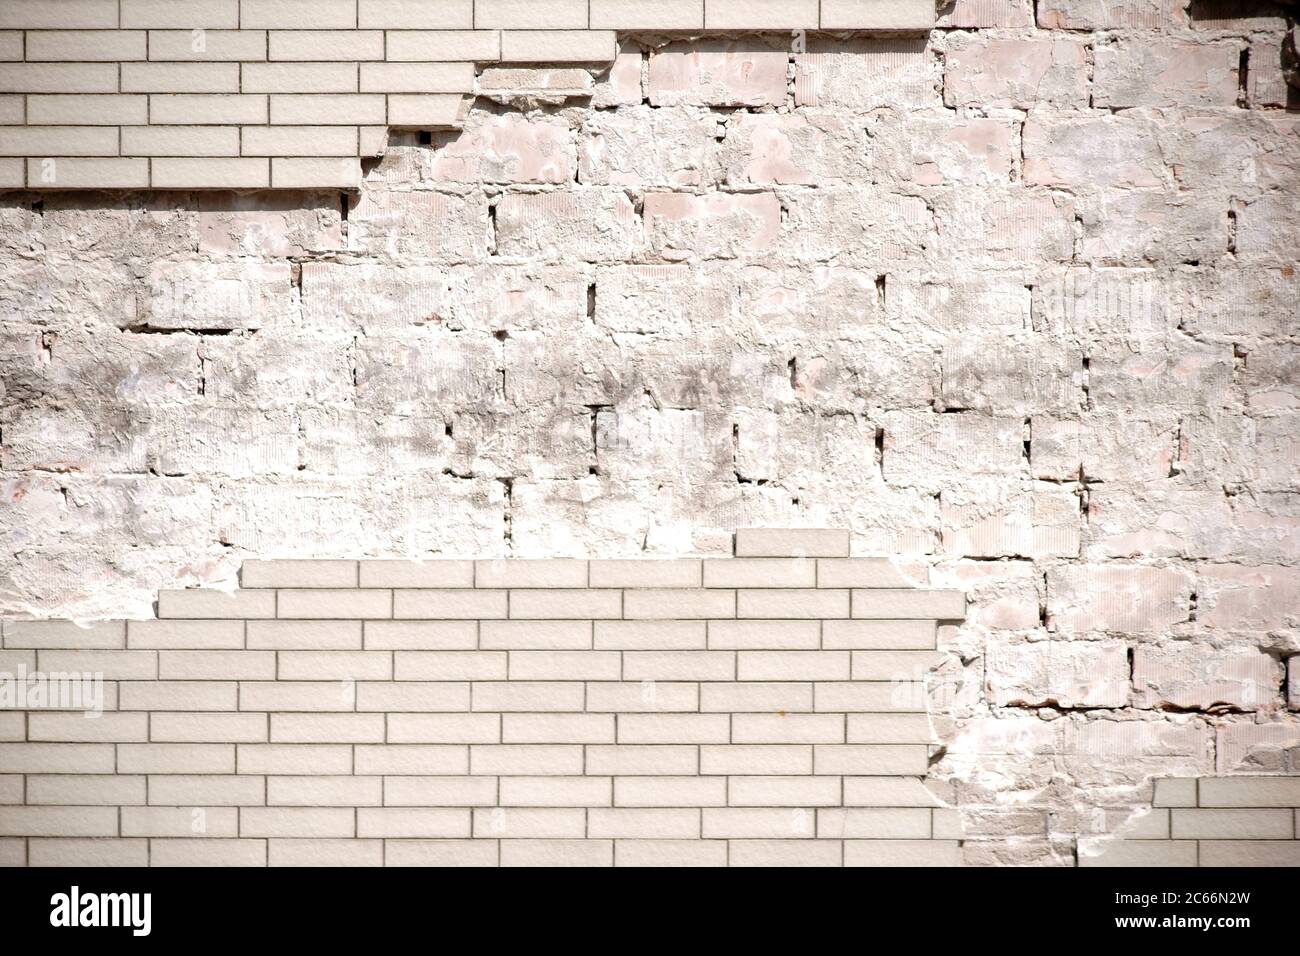 Close-up of a house facade with chipped clinker bricks, Stock Photo